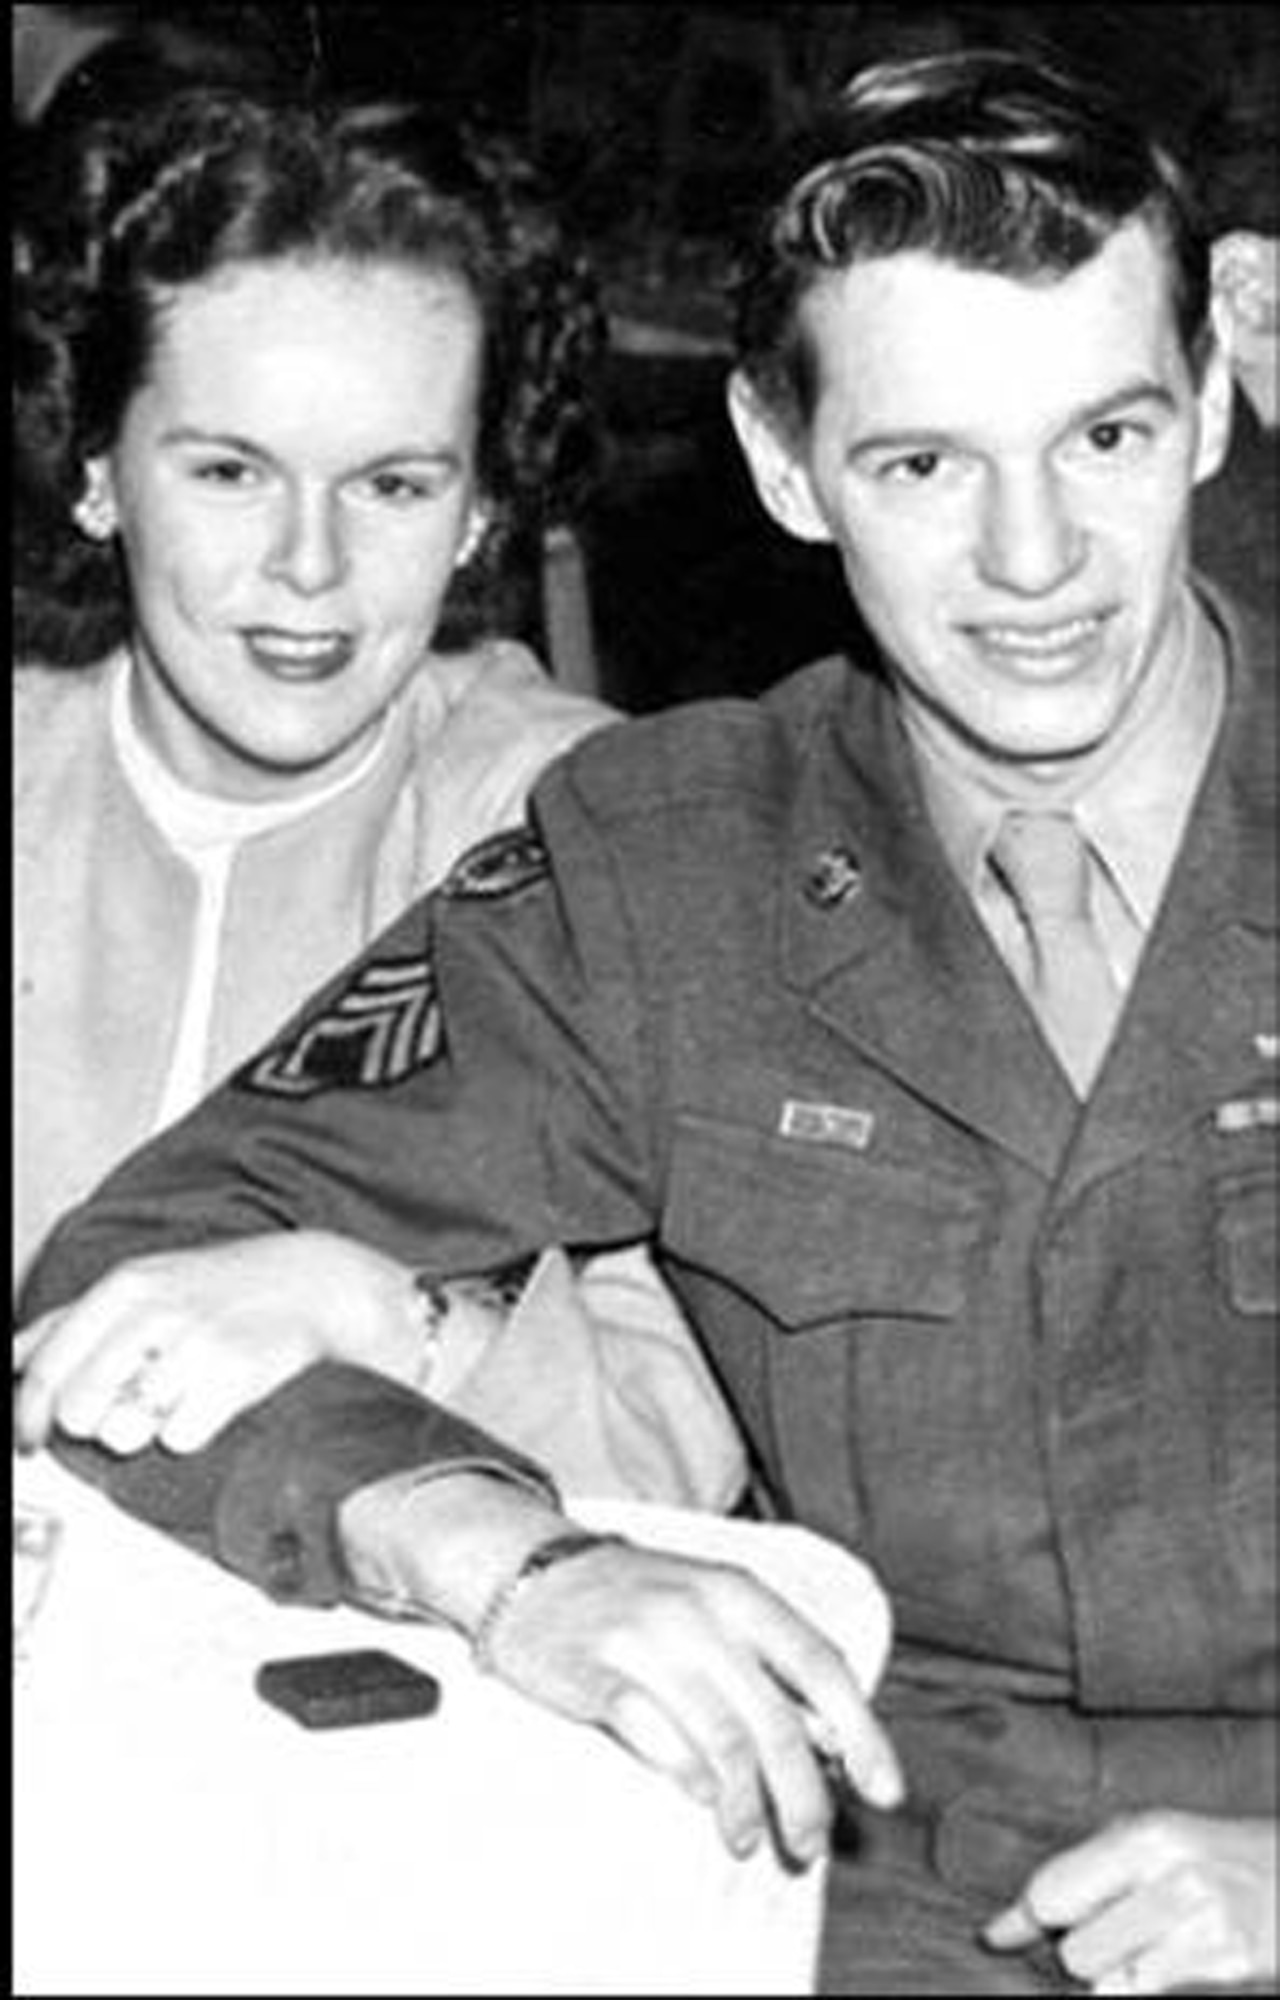 Tech. Sgt. Airey and his wife, Shirley Babbitt Airey, on their wedding day, Feb. 10, 1946.